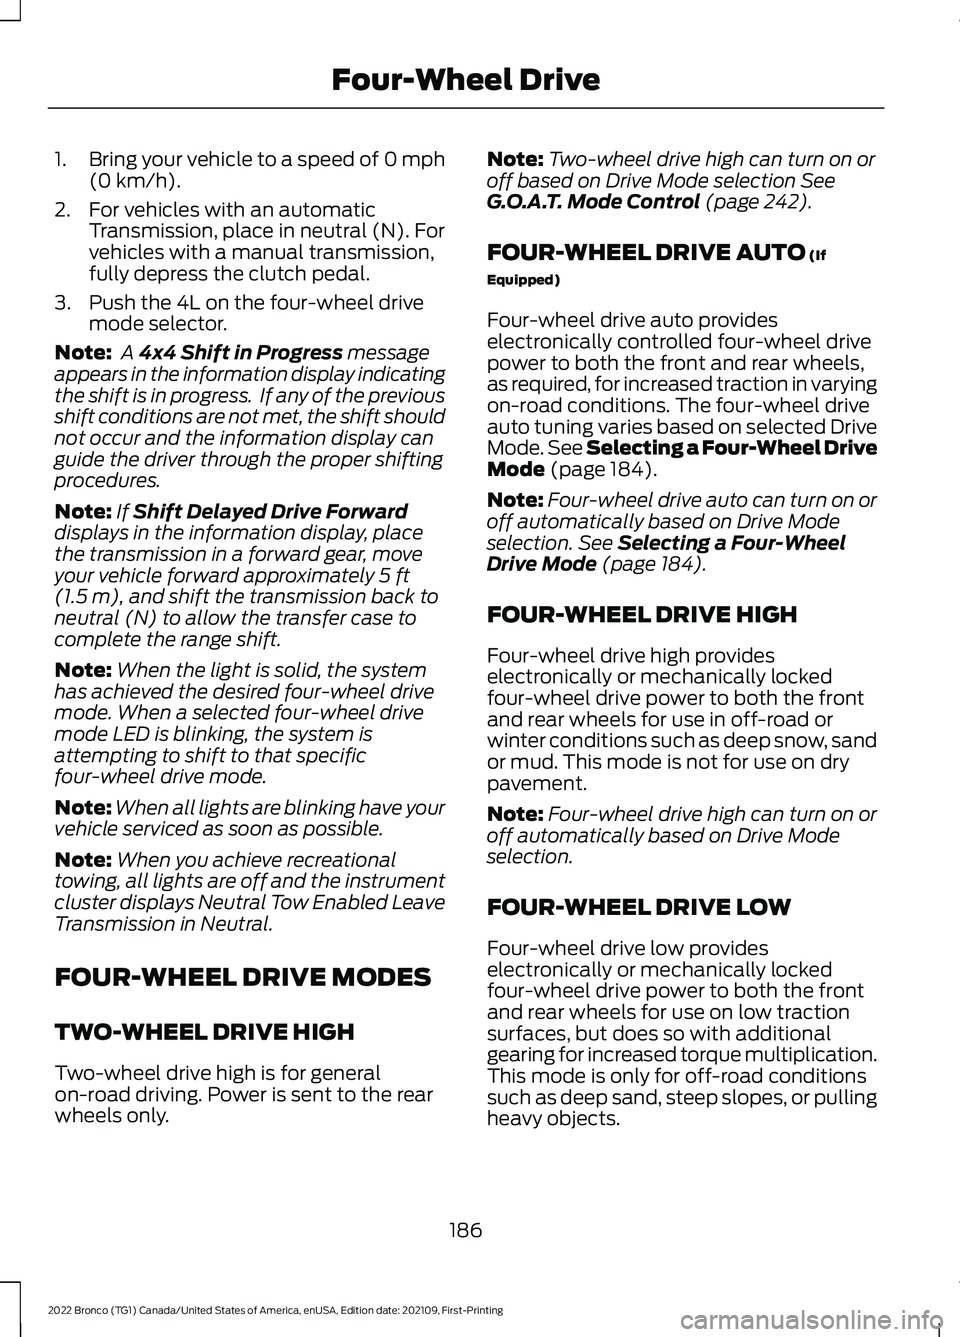 FORD BRONCO 2022  Owners Manual 1.Bring your vehicle to a speed of 0 mph(0 km/h).
2.For vehicles with an automaticTransmission, place in neutral (N). Forvehicles with a manual transmission,fully depress the clutch pedal.
3.Push the 